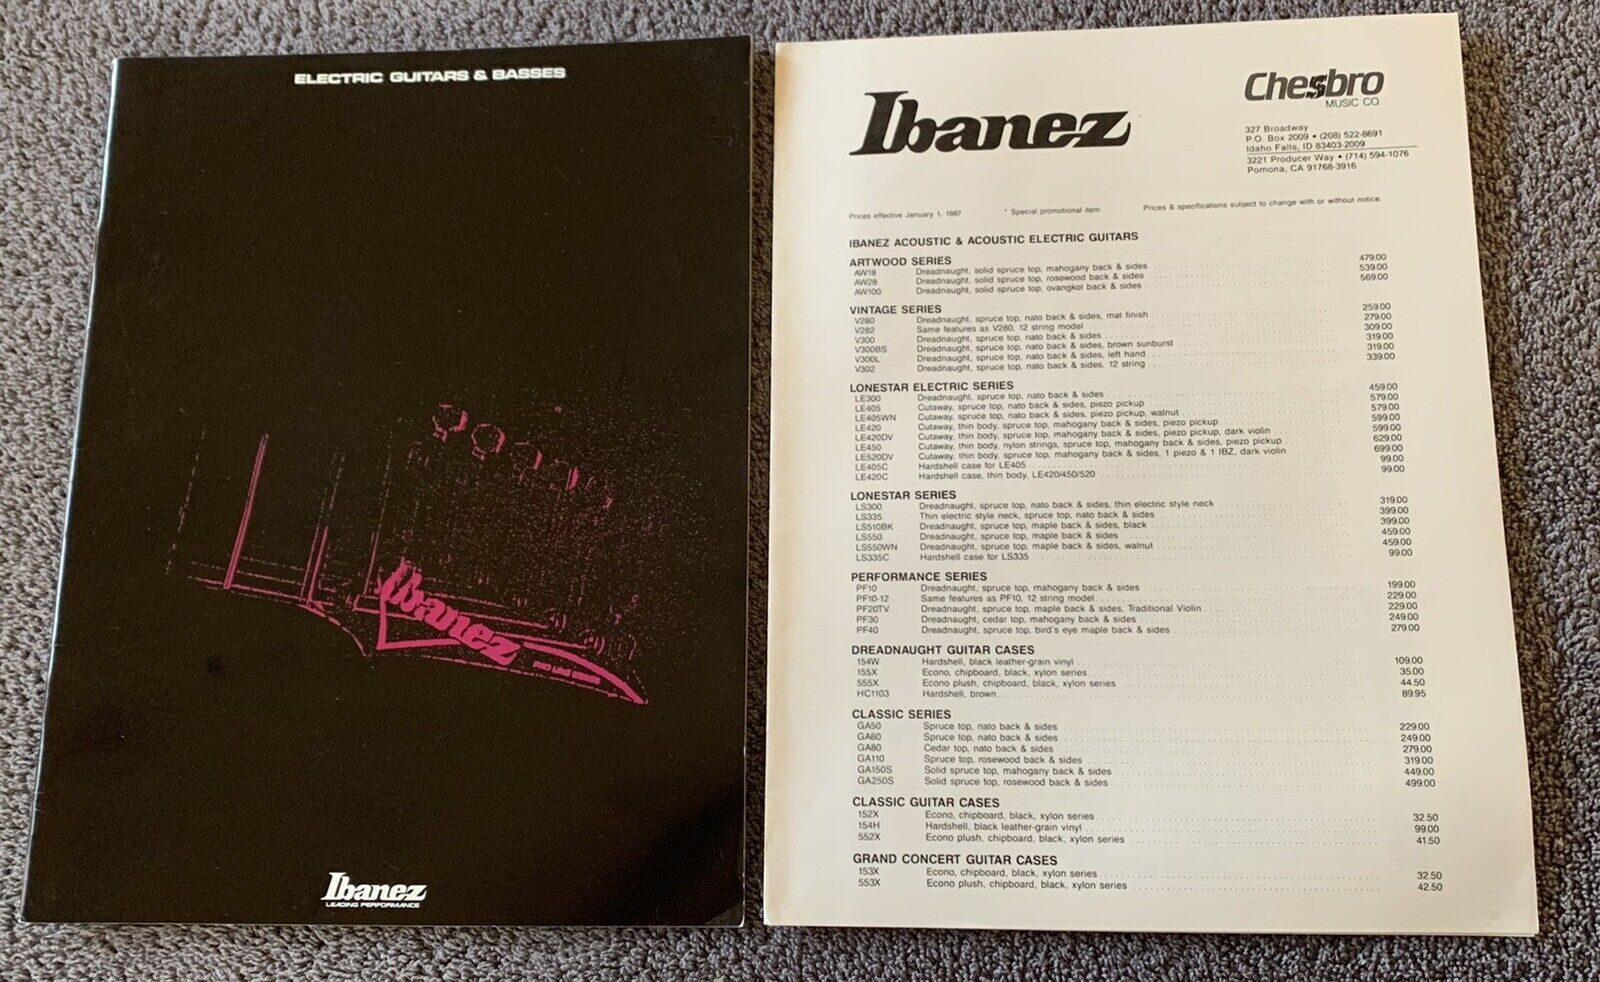 VINTAGE IBANEZ ELECTRIC GUITARS & BASSES CATALOG - MUSIC STARS INCLUDED - BEAUTY